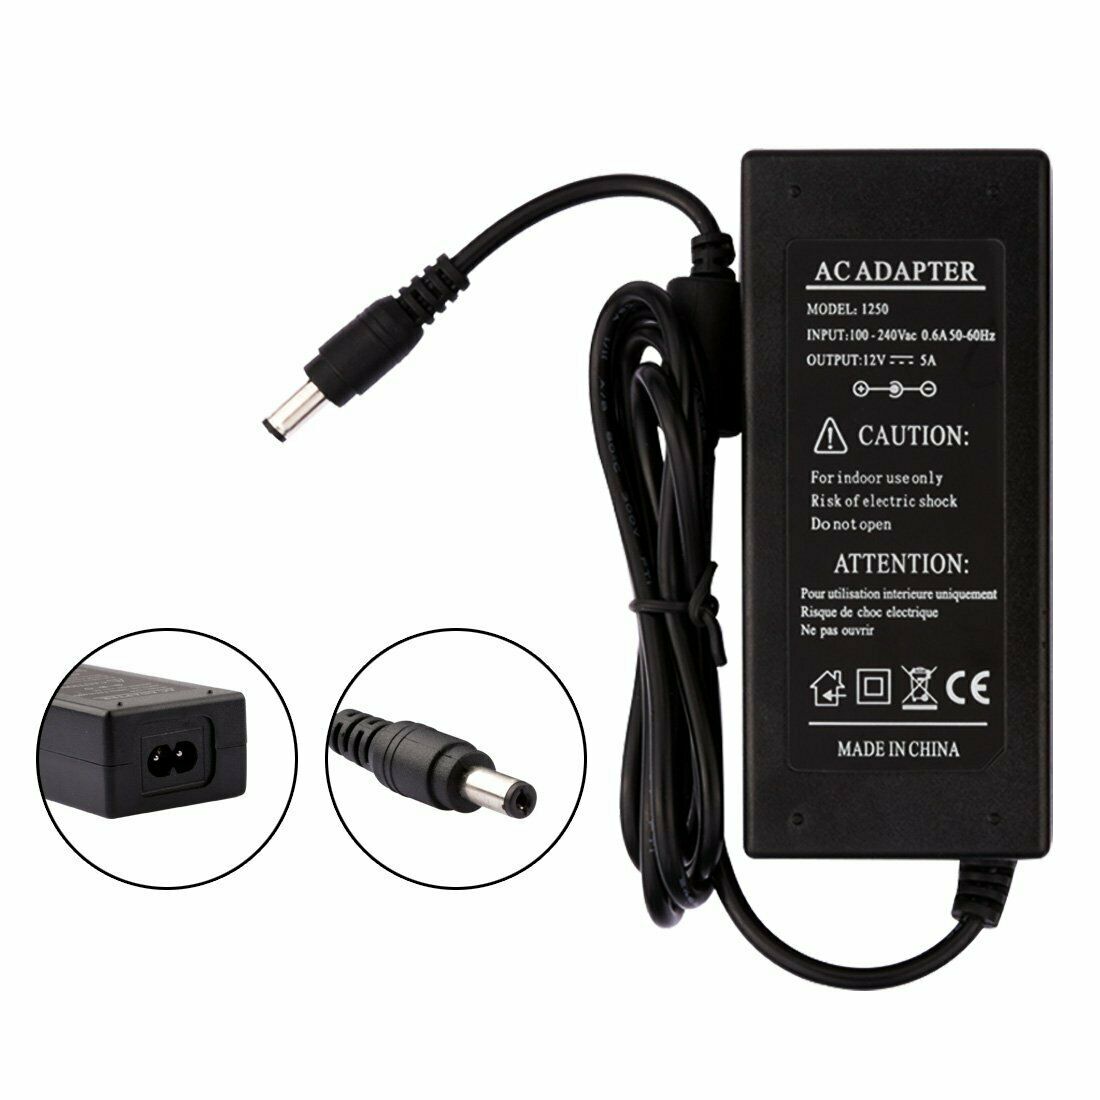 AC DC 12V 5A Power Supply Adapter Charger Transformer for 3528/5050 LED Strip